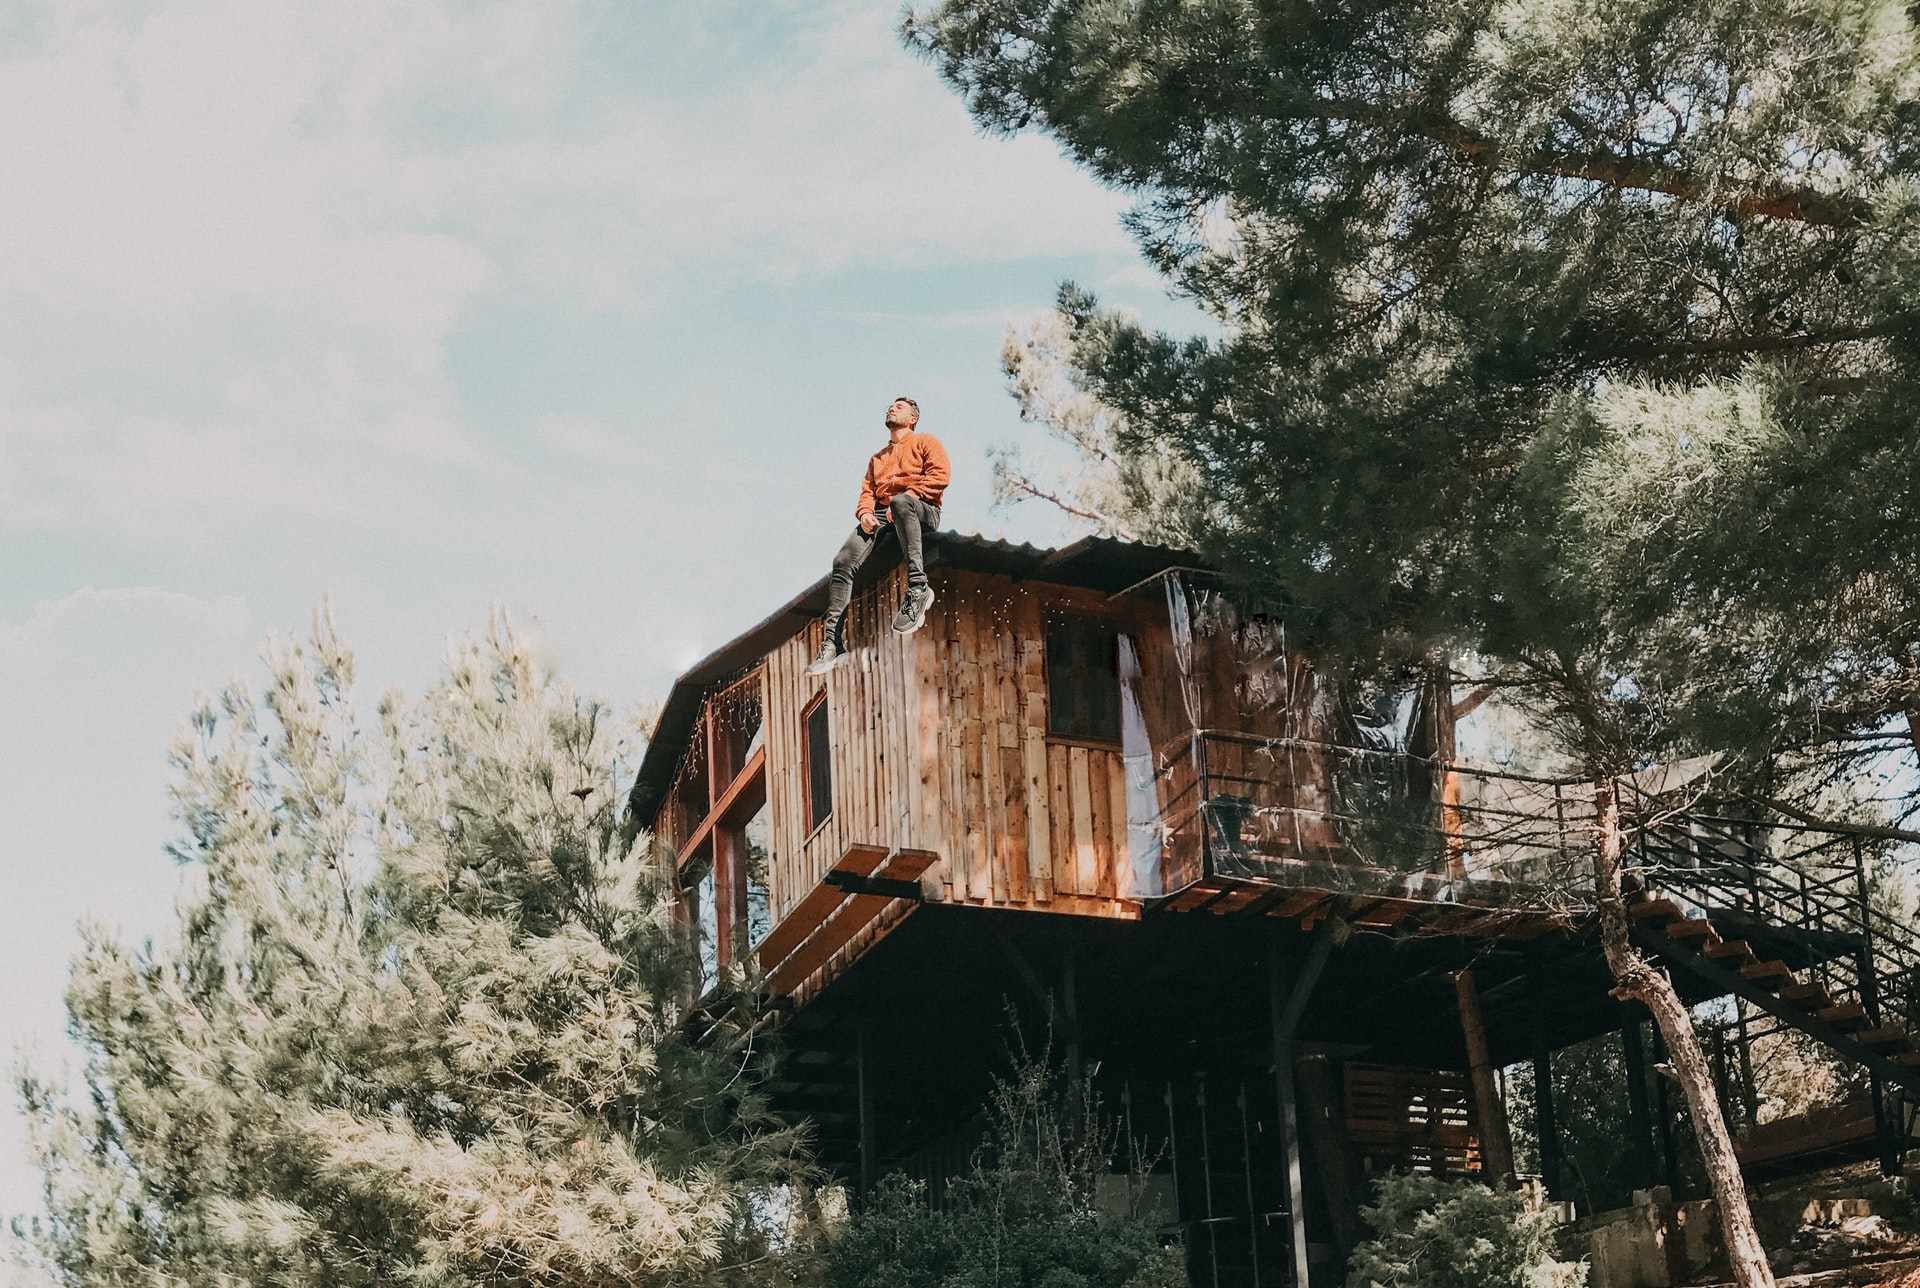 Tree House Rentals in Arkansas: 10 Handpicked Options for You